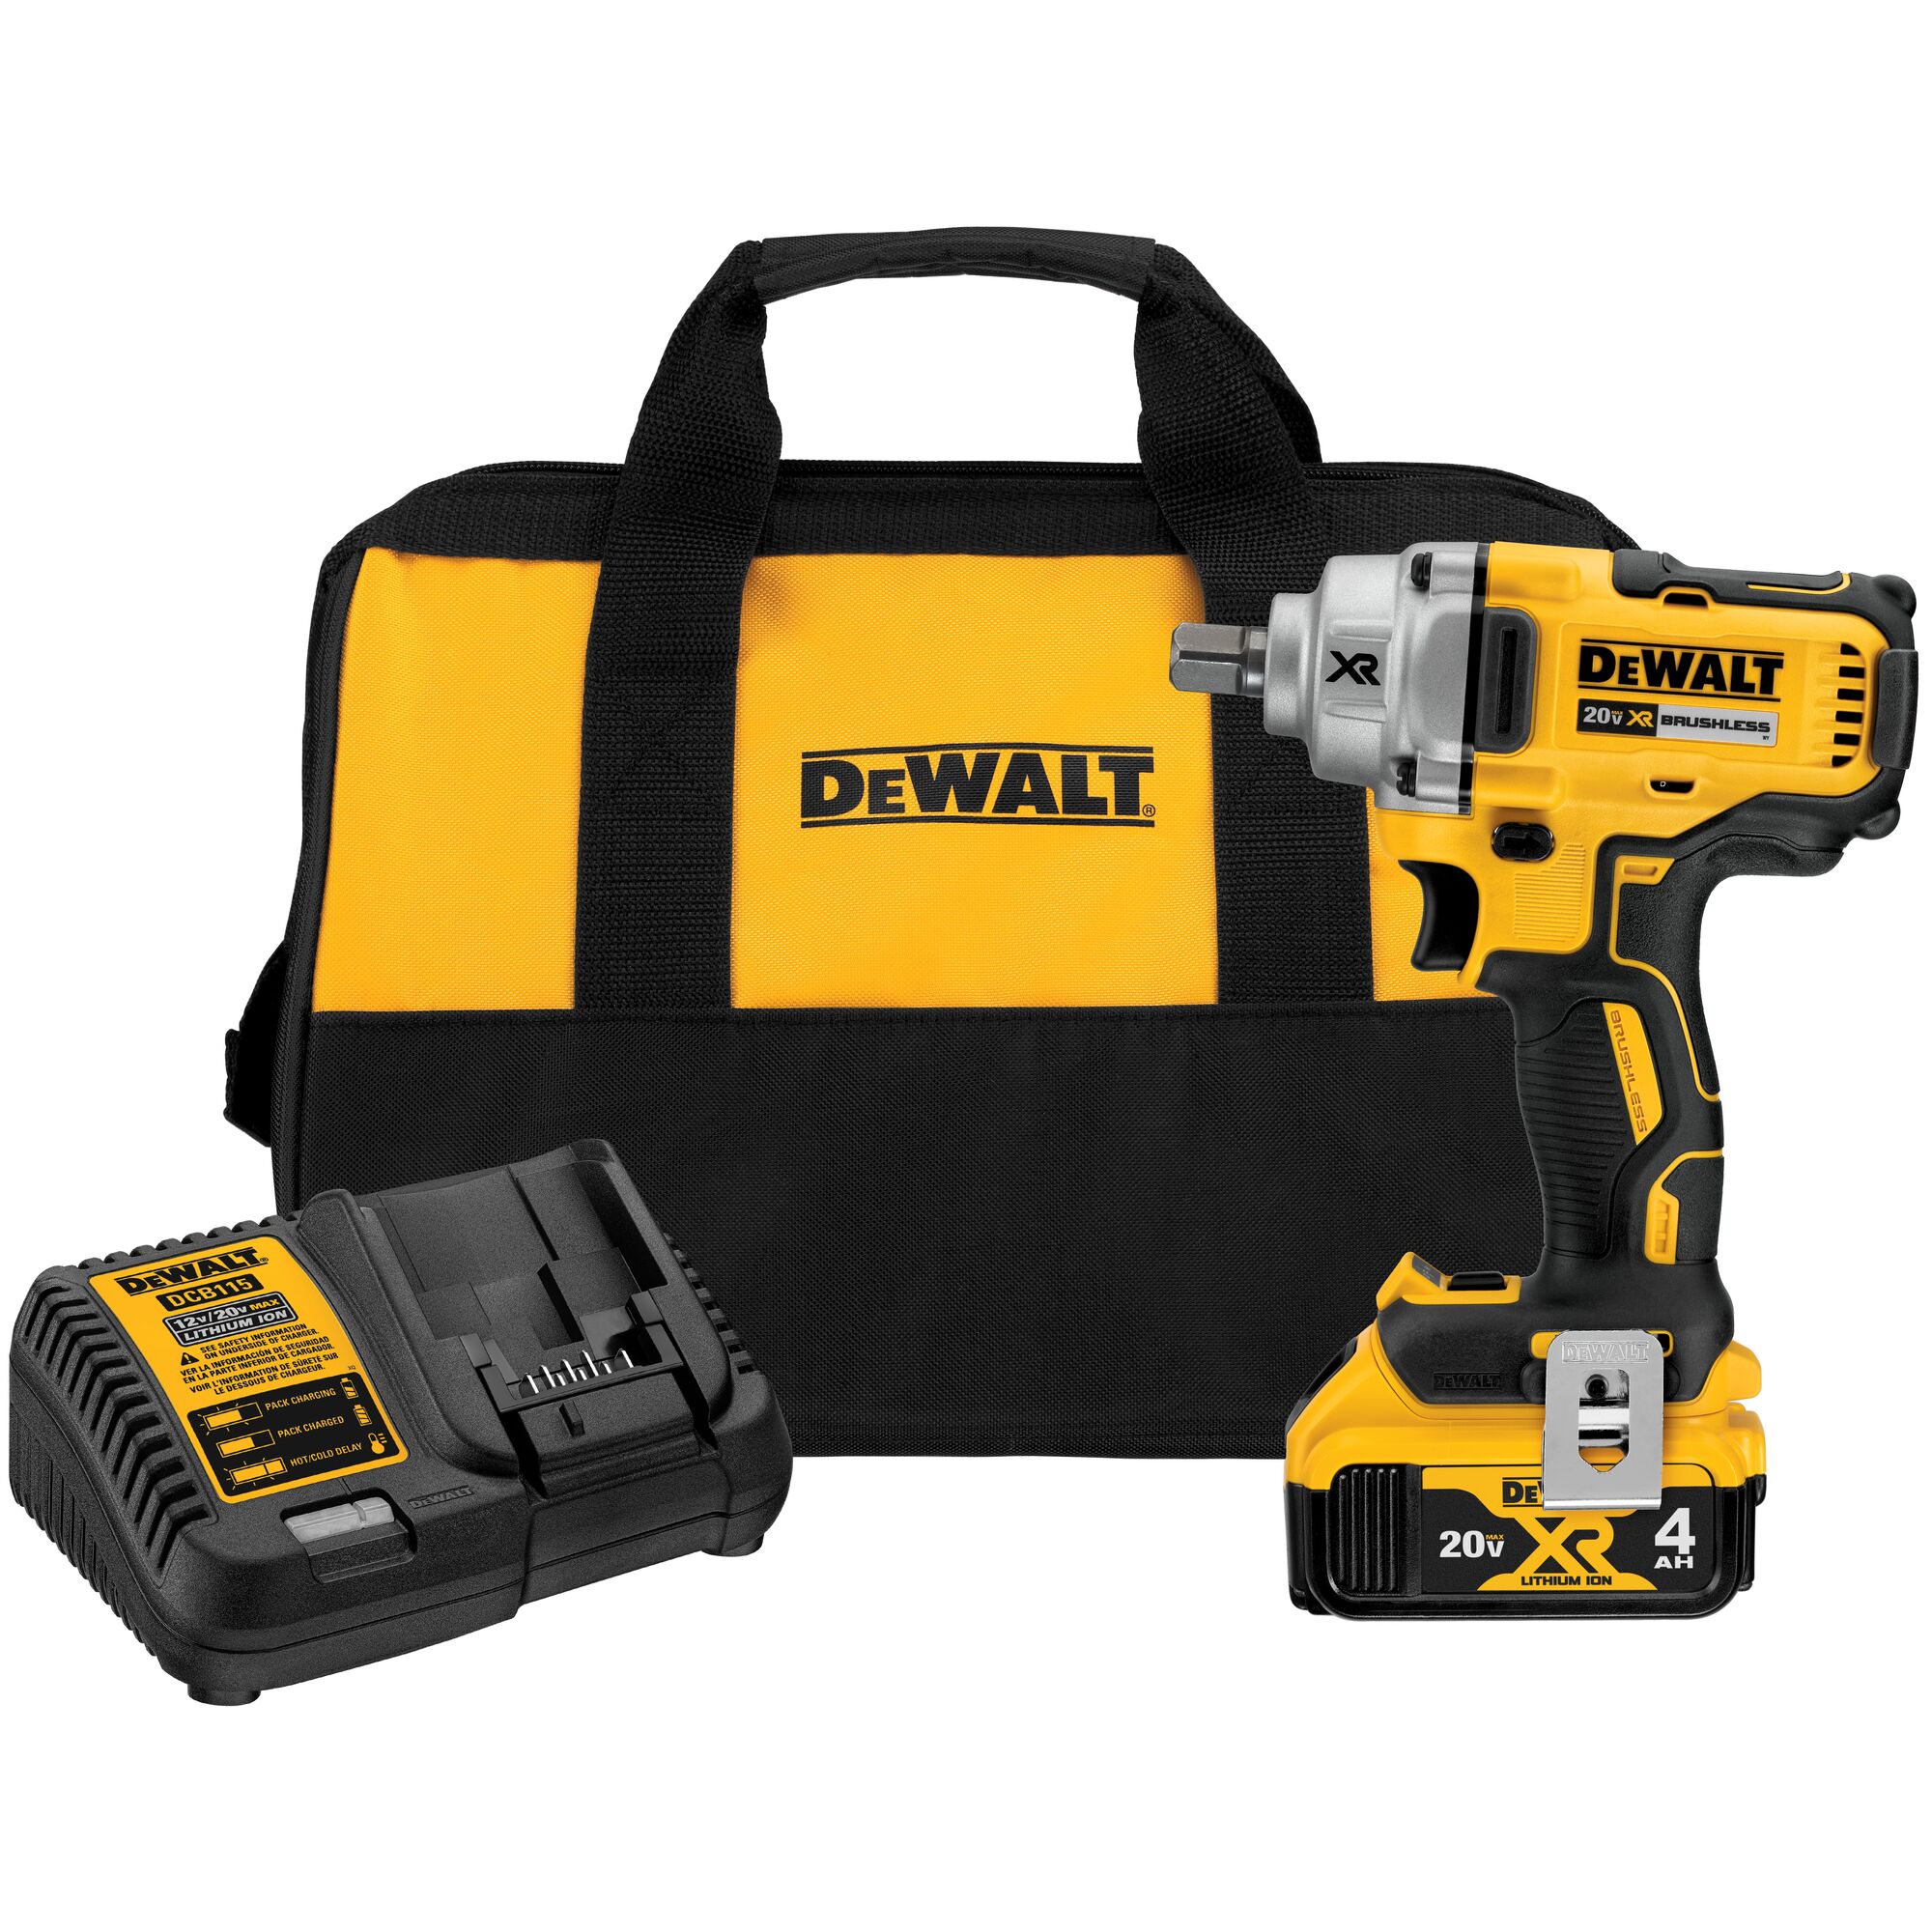 Wrench Wrenches Cordless Impact Drive Speed Brushless DEWALT Max Impact in at Included) 20-volt 1/2-in department Xr (Battery the Variable